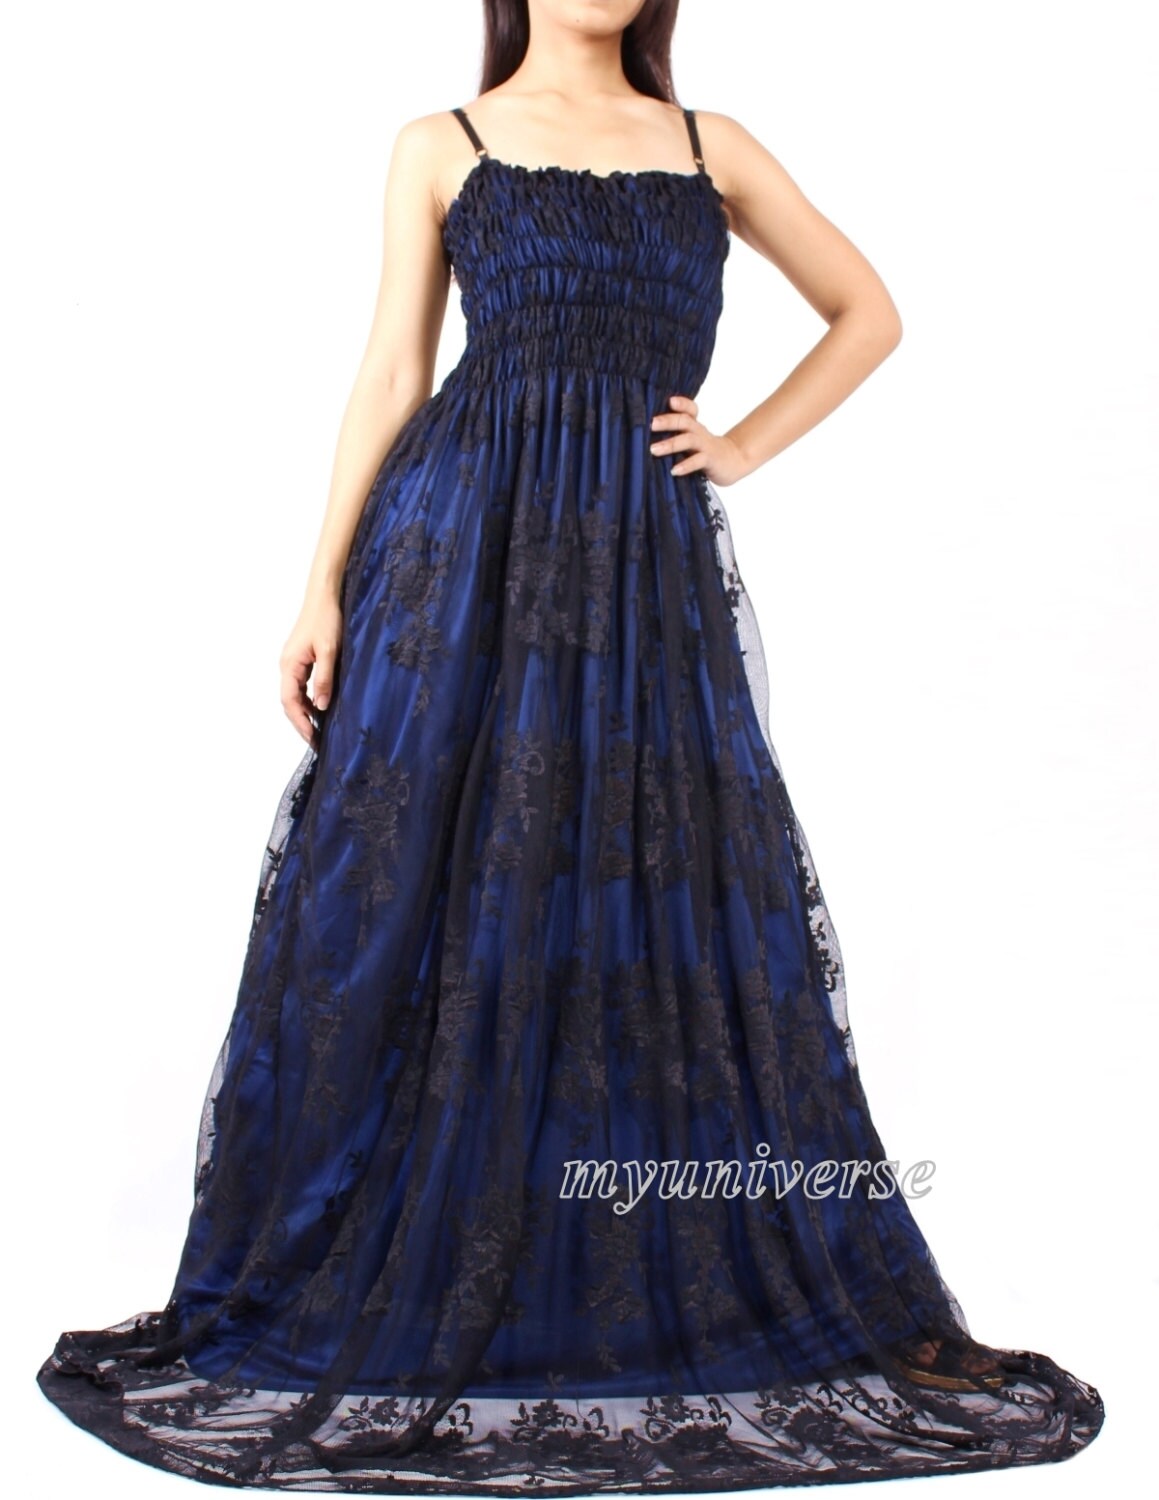  Evening  Gown Formal  Dress  Extra  Long For Tall Women Plus  Size 